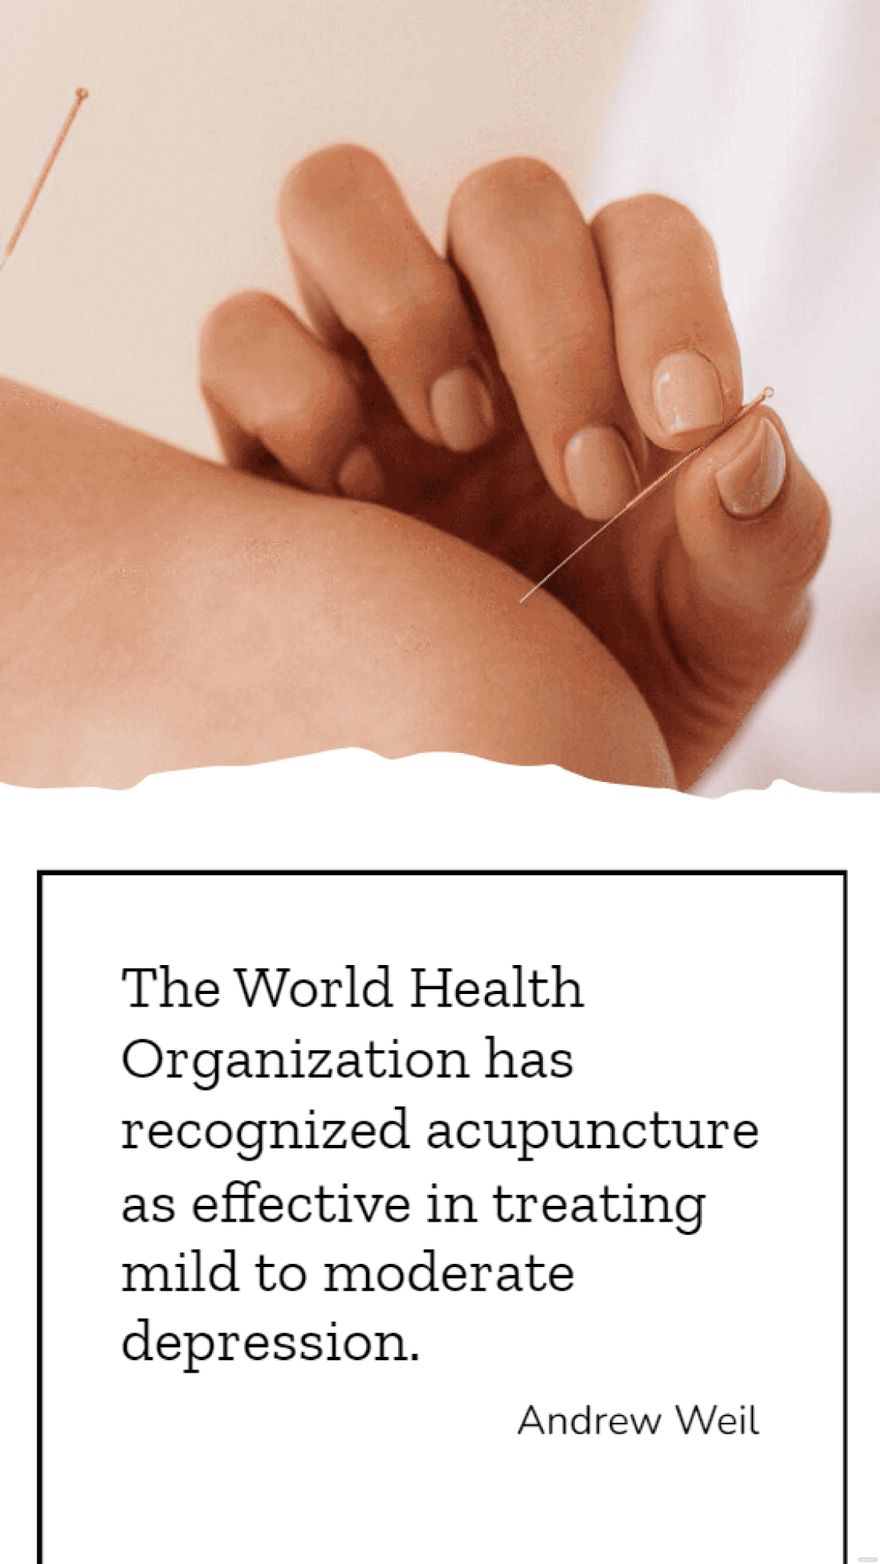 Andrew Weil  The World Health Organization has recognized acupuncture as effective in treating mild to moderate depression